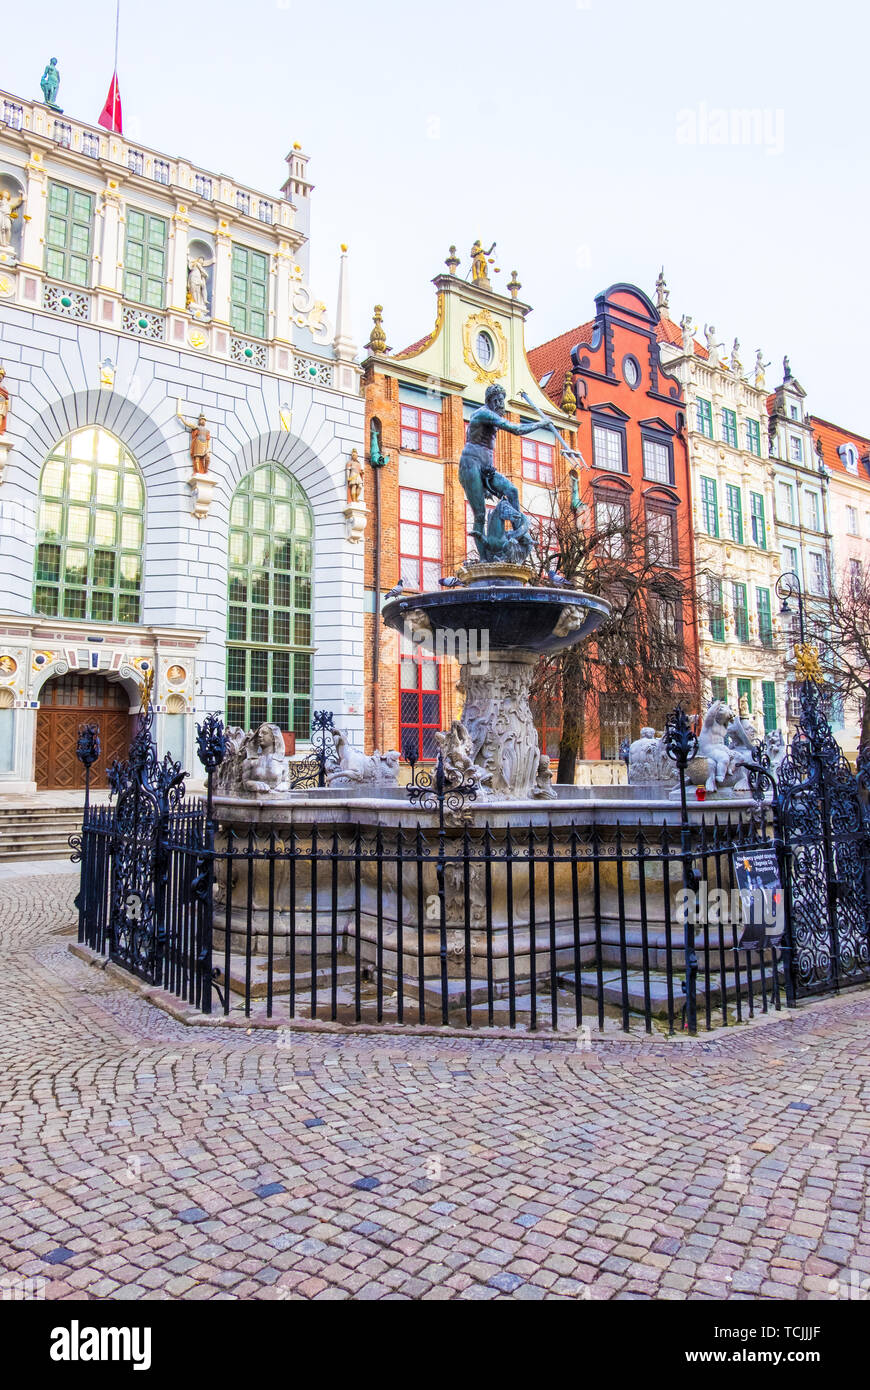 Gdansk, Poland - February 07, 2019: Neptune's Fountain in the centre of the Long Market Street next to Artus Court, Gdansk, Poland Stock Photo